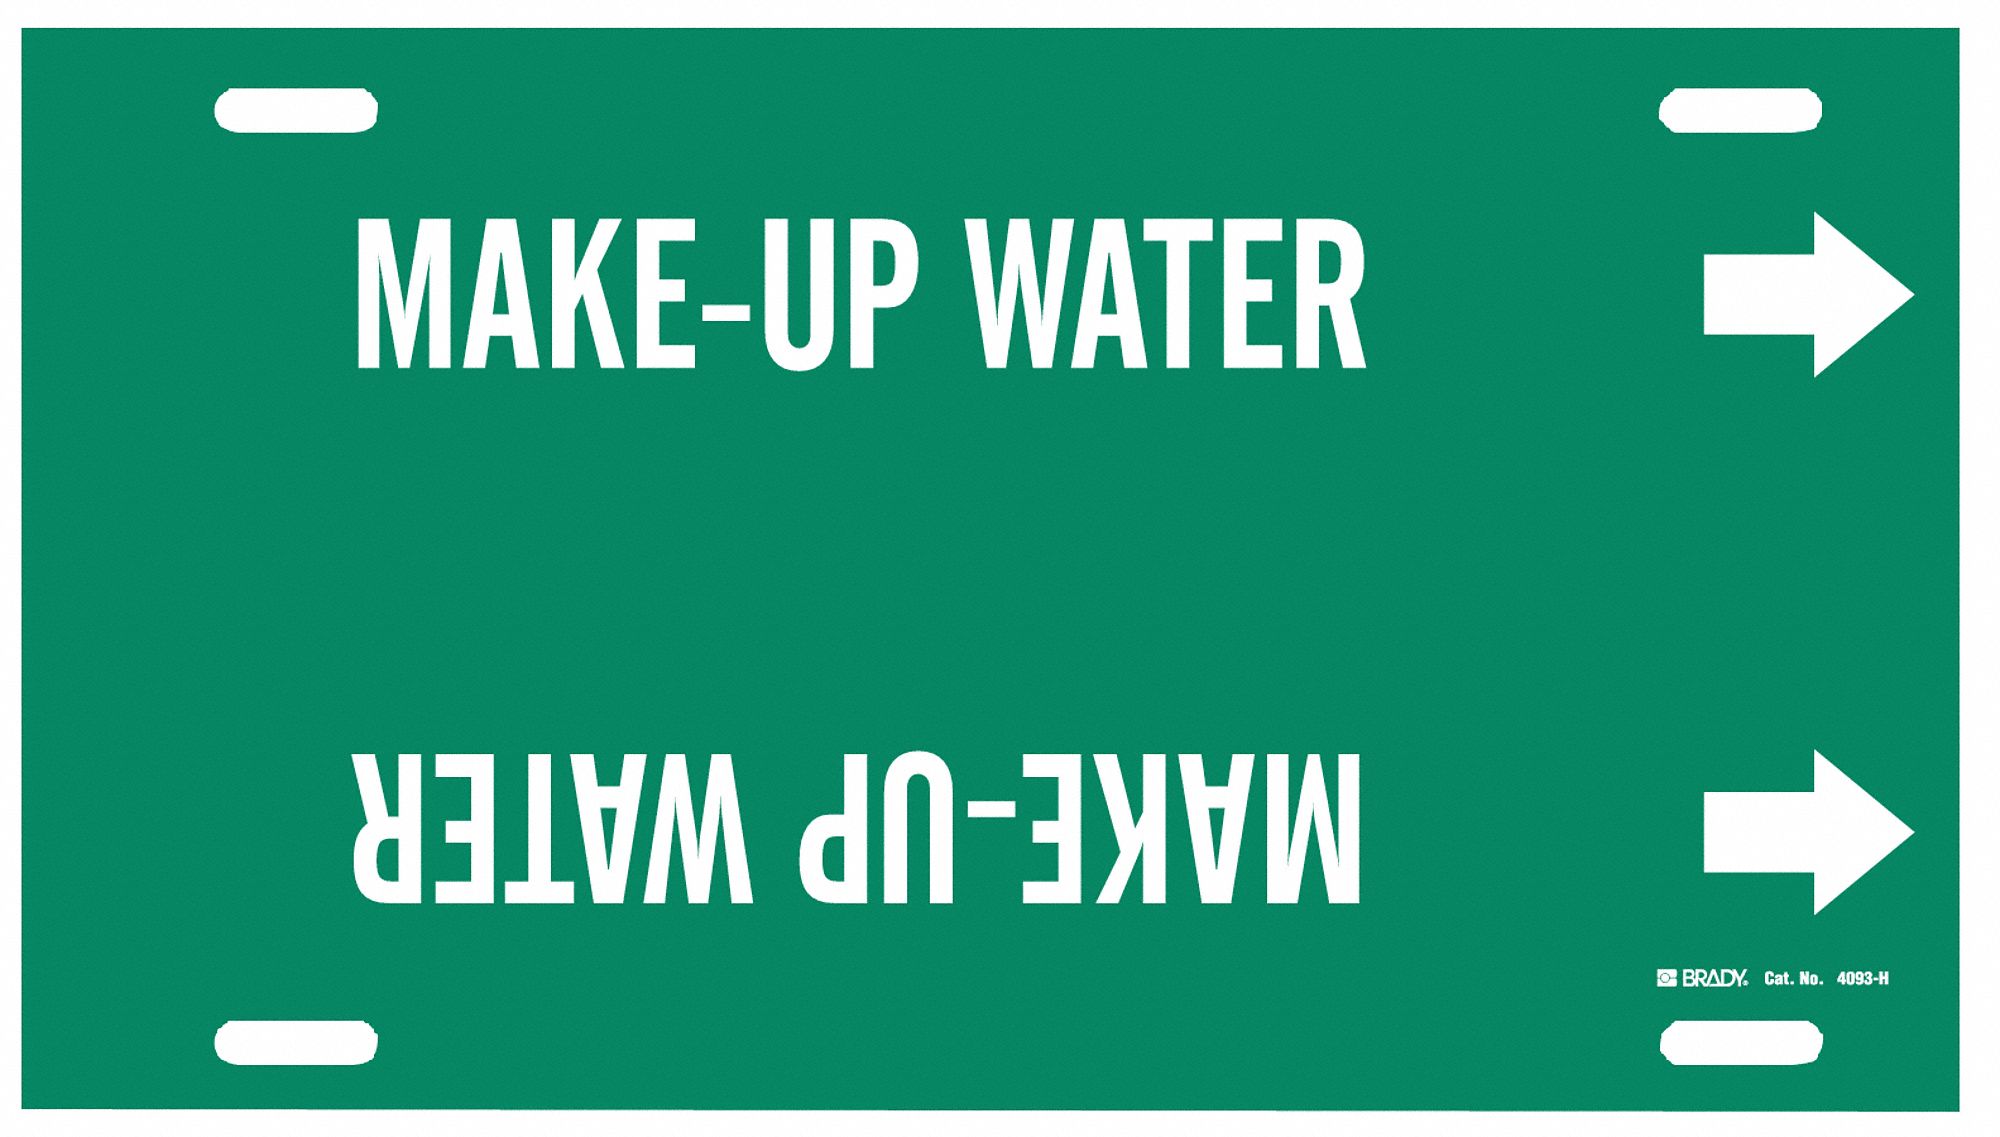 Pipe Marker,Make Up Water,Grn,10 to15 In